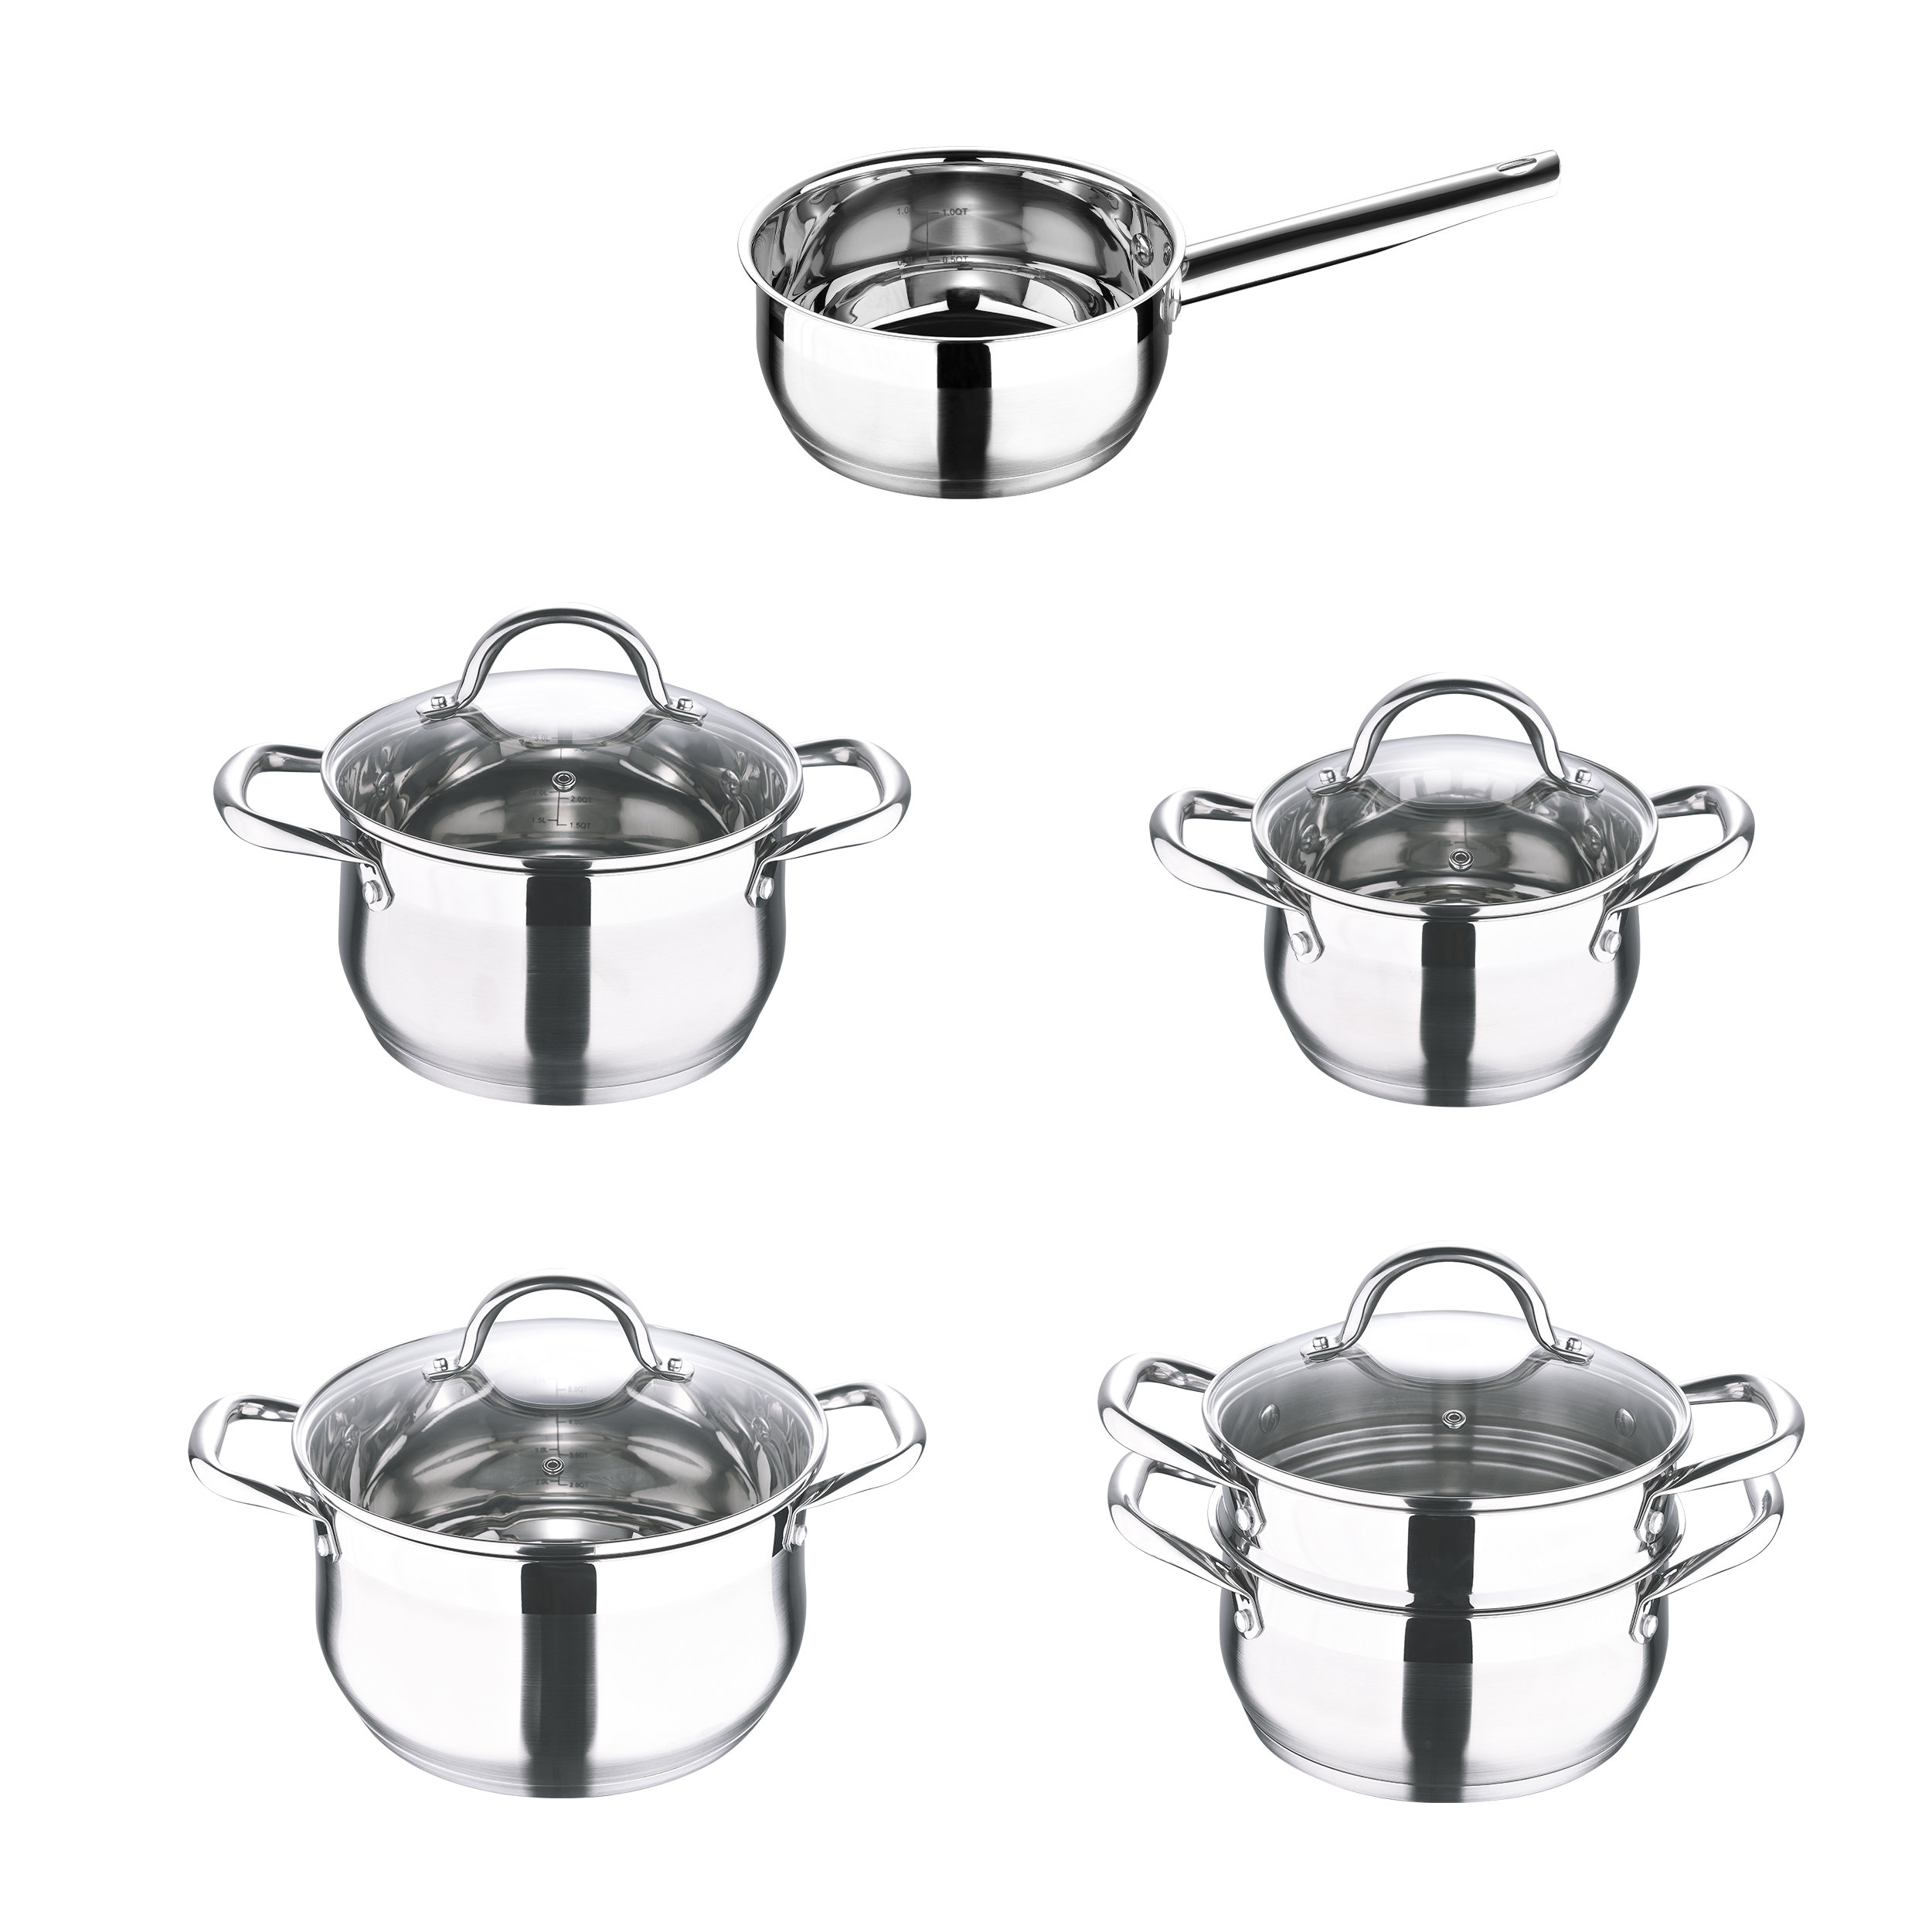 Gourmet by Bergner - 8 Qt Stainless Steel Dutch Oven with Vented Glass Lid,  8 Quarts, Polished 